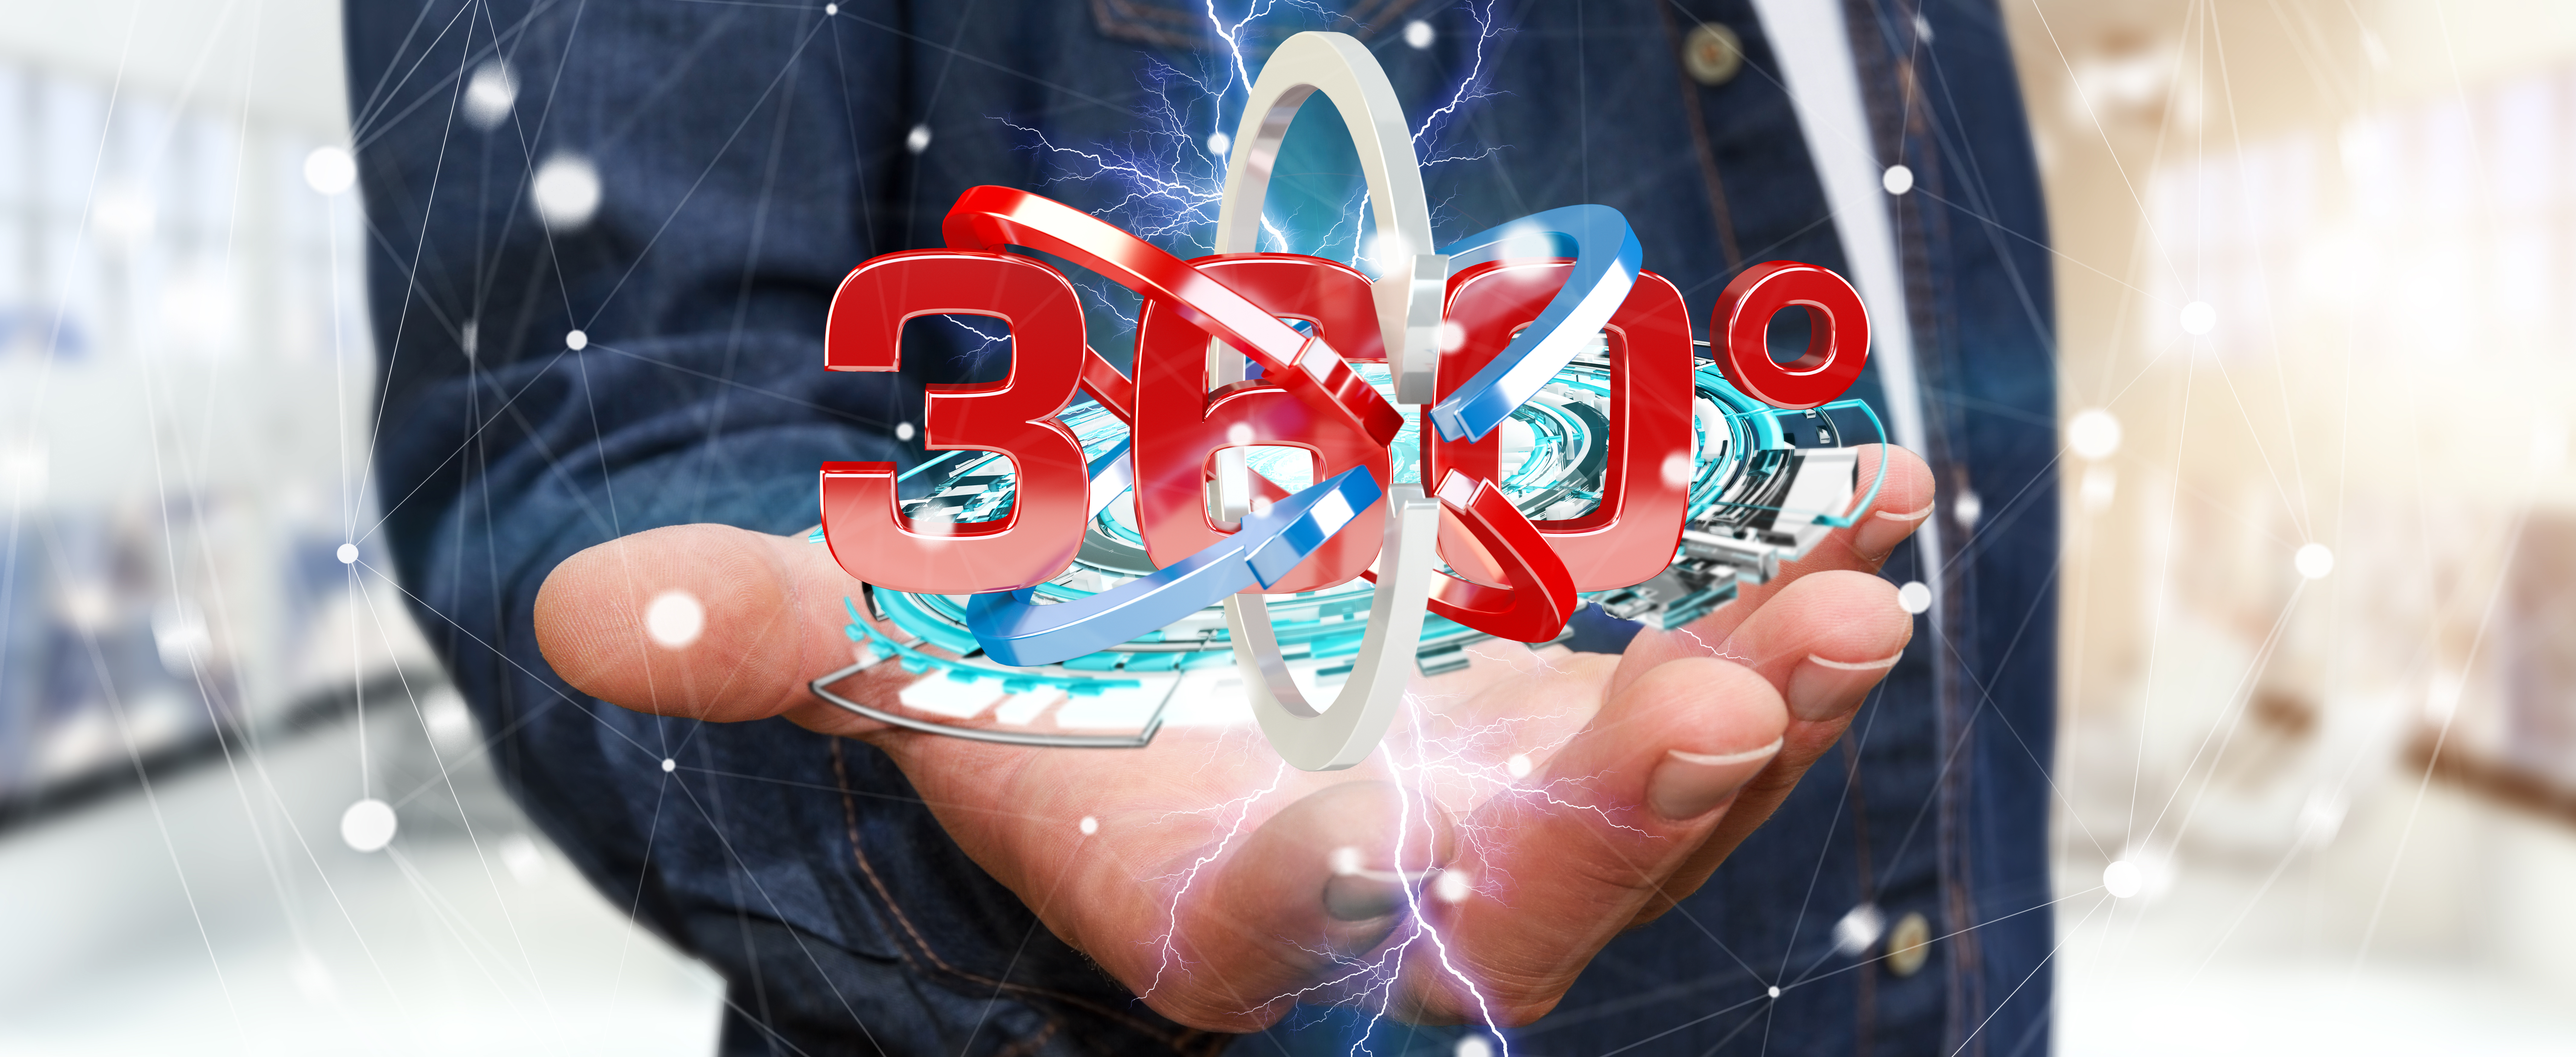 Man on blurred background holding 360 degree 3D render icon in his hand